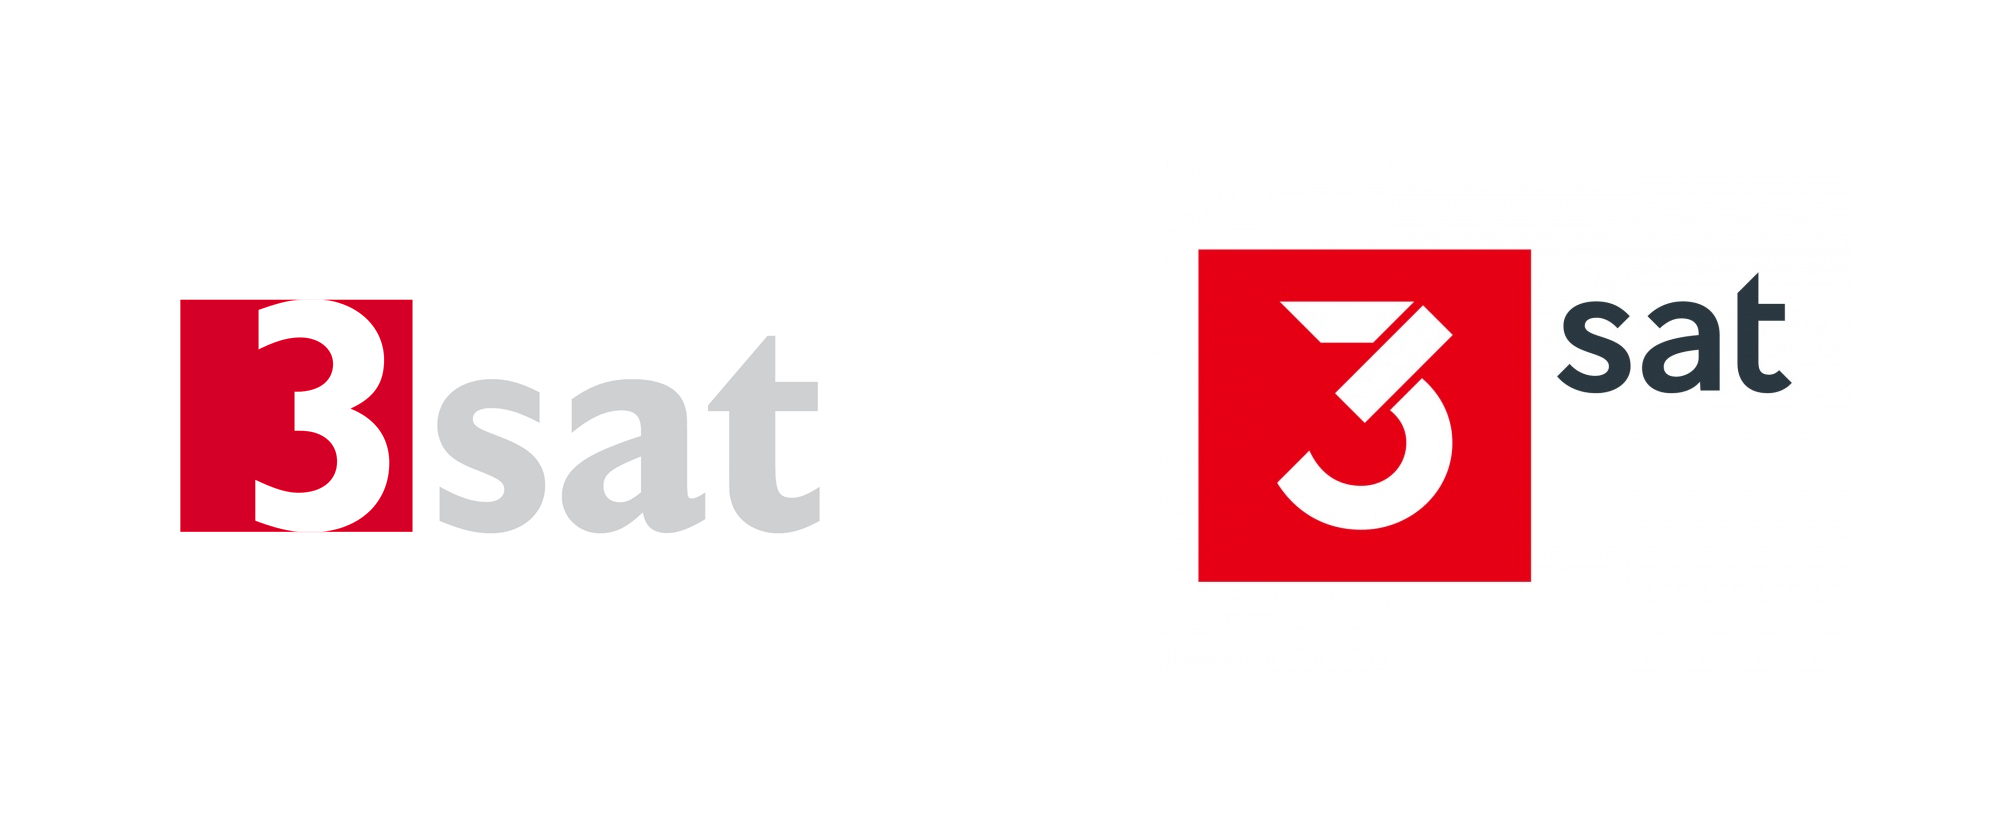 New Logo and On-air Look for 3sat by BDA Creative